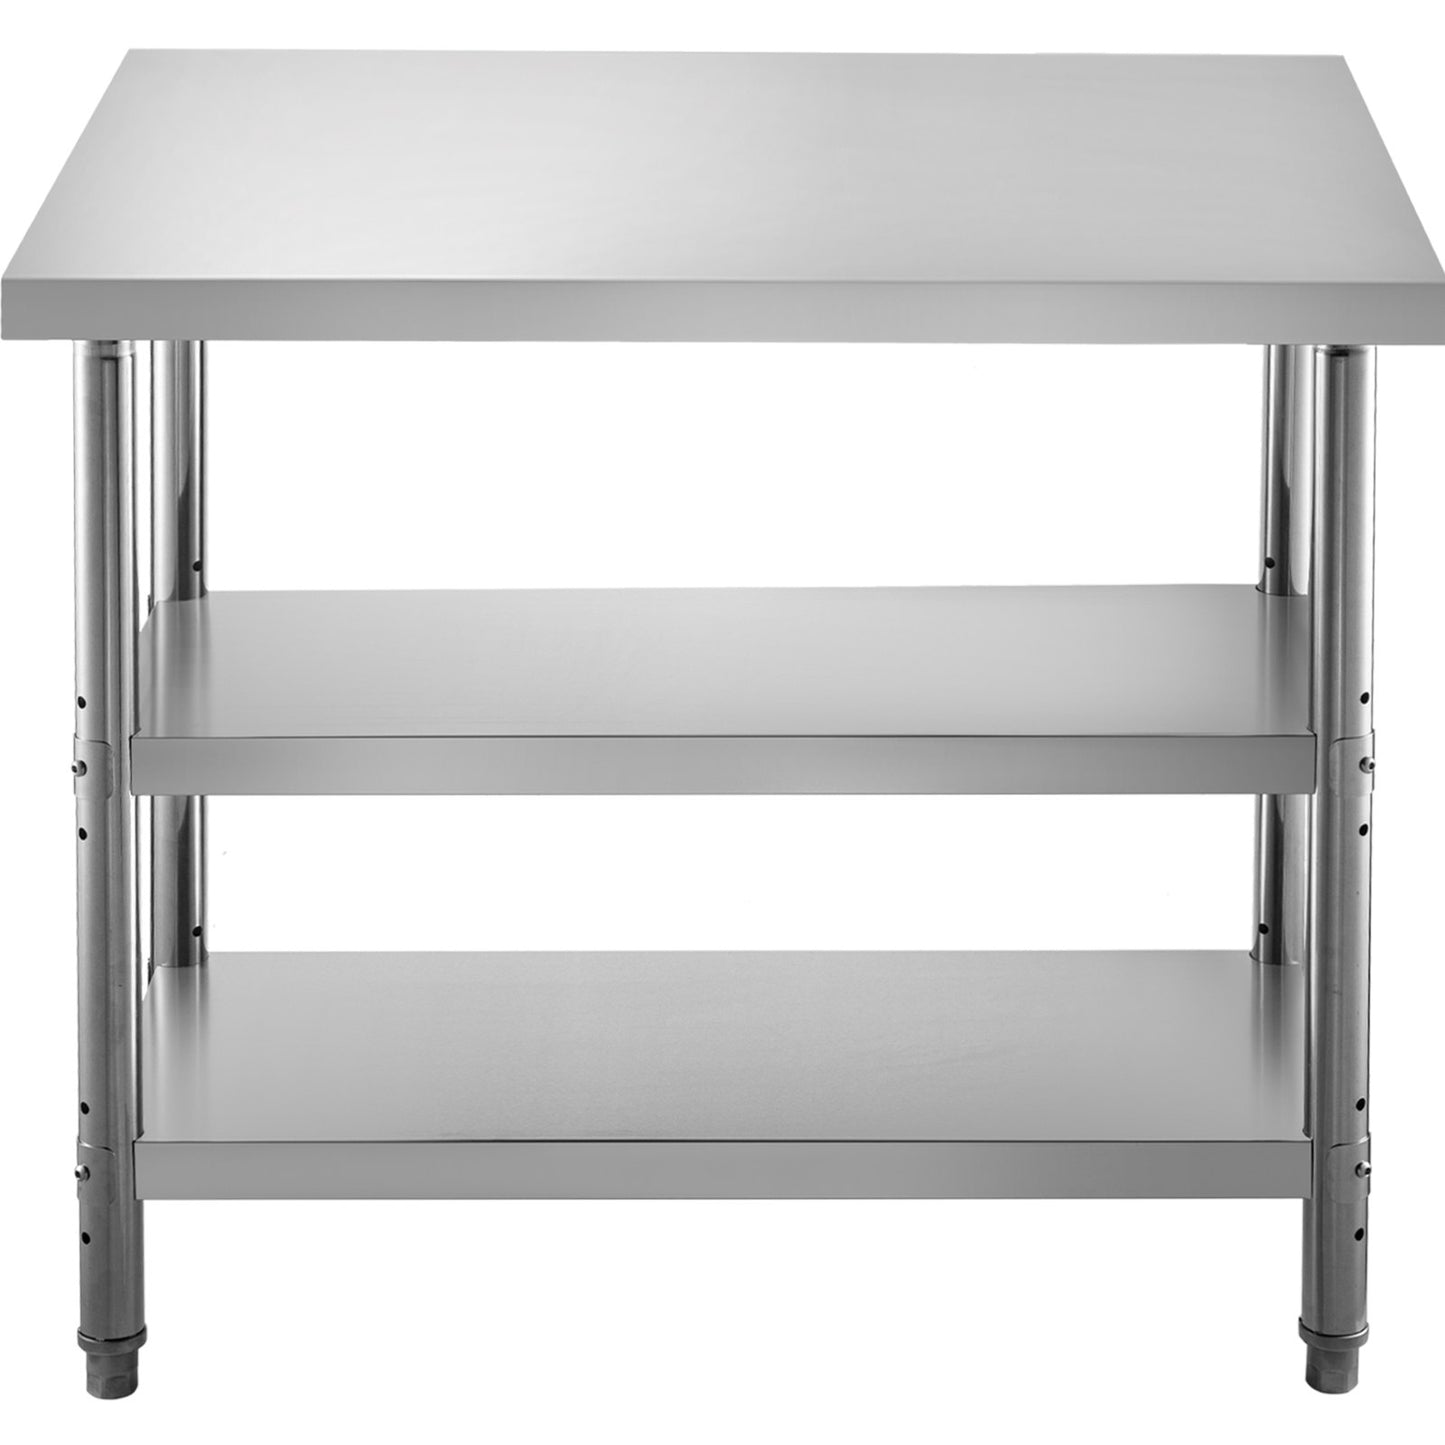 Stainless Steel Prep Table, 60x14x33 in -9